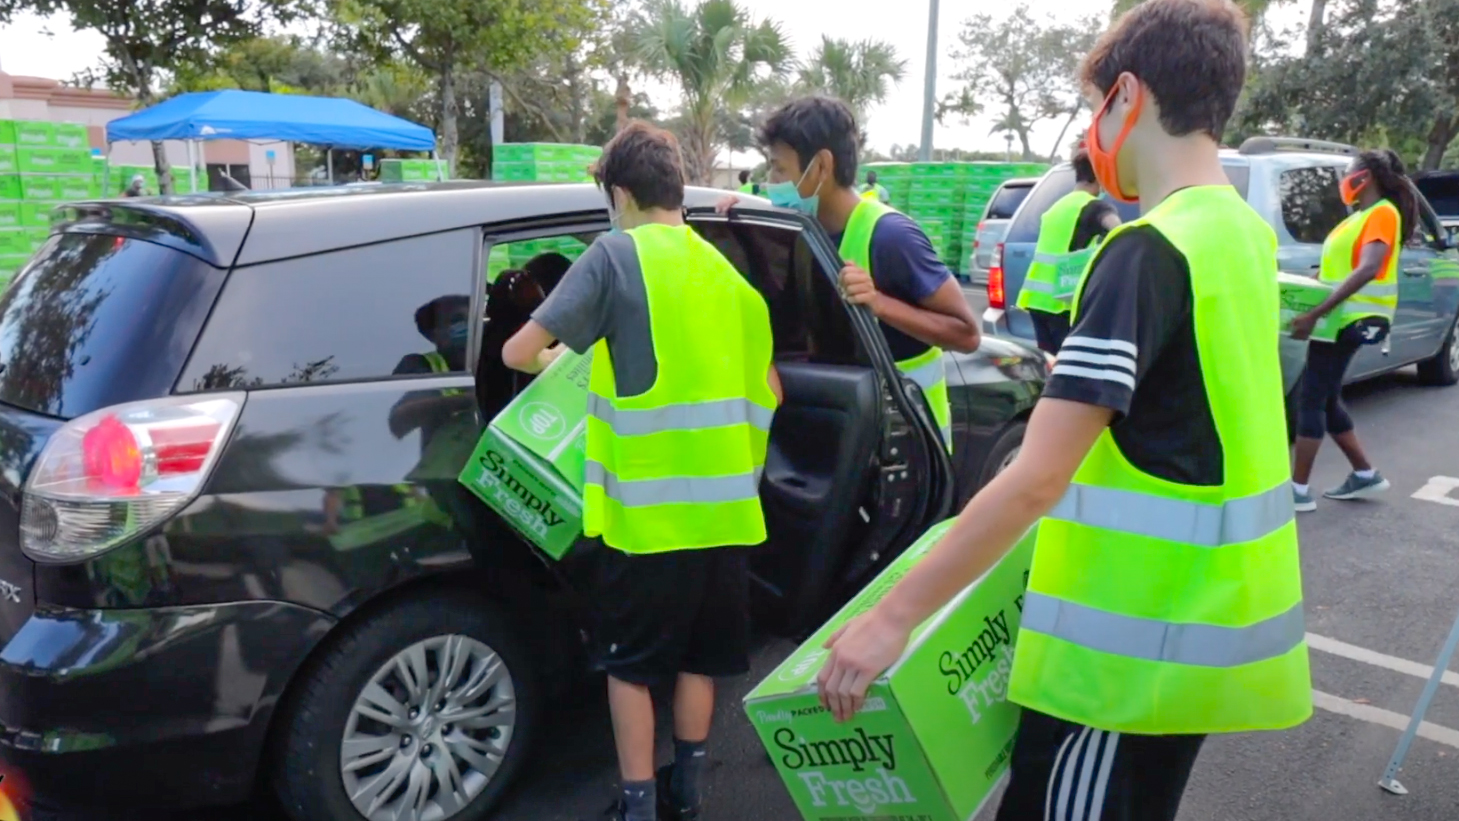 Chabad of Coral Springs Holds Next Free Food Distribution Dec 7